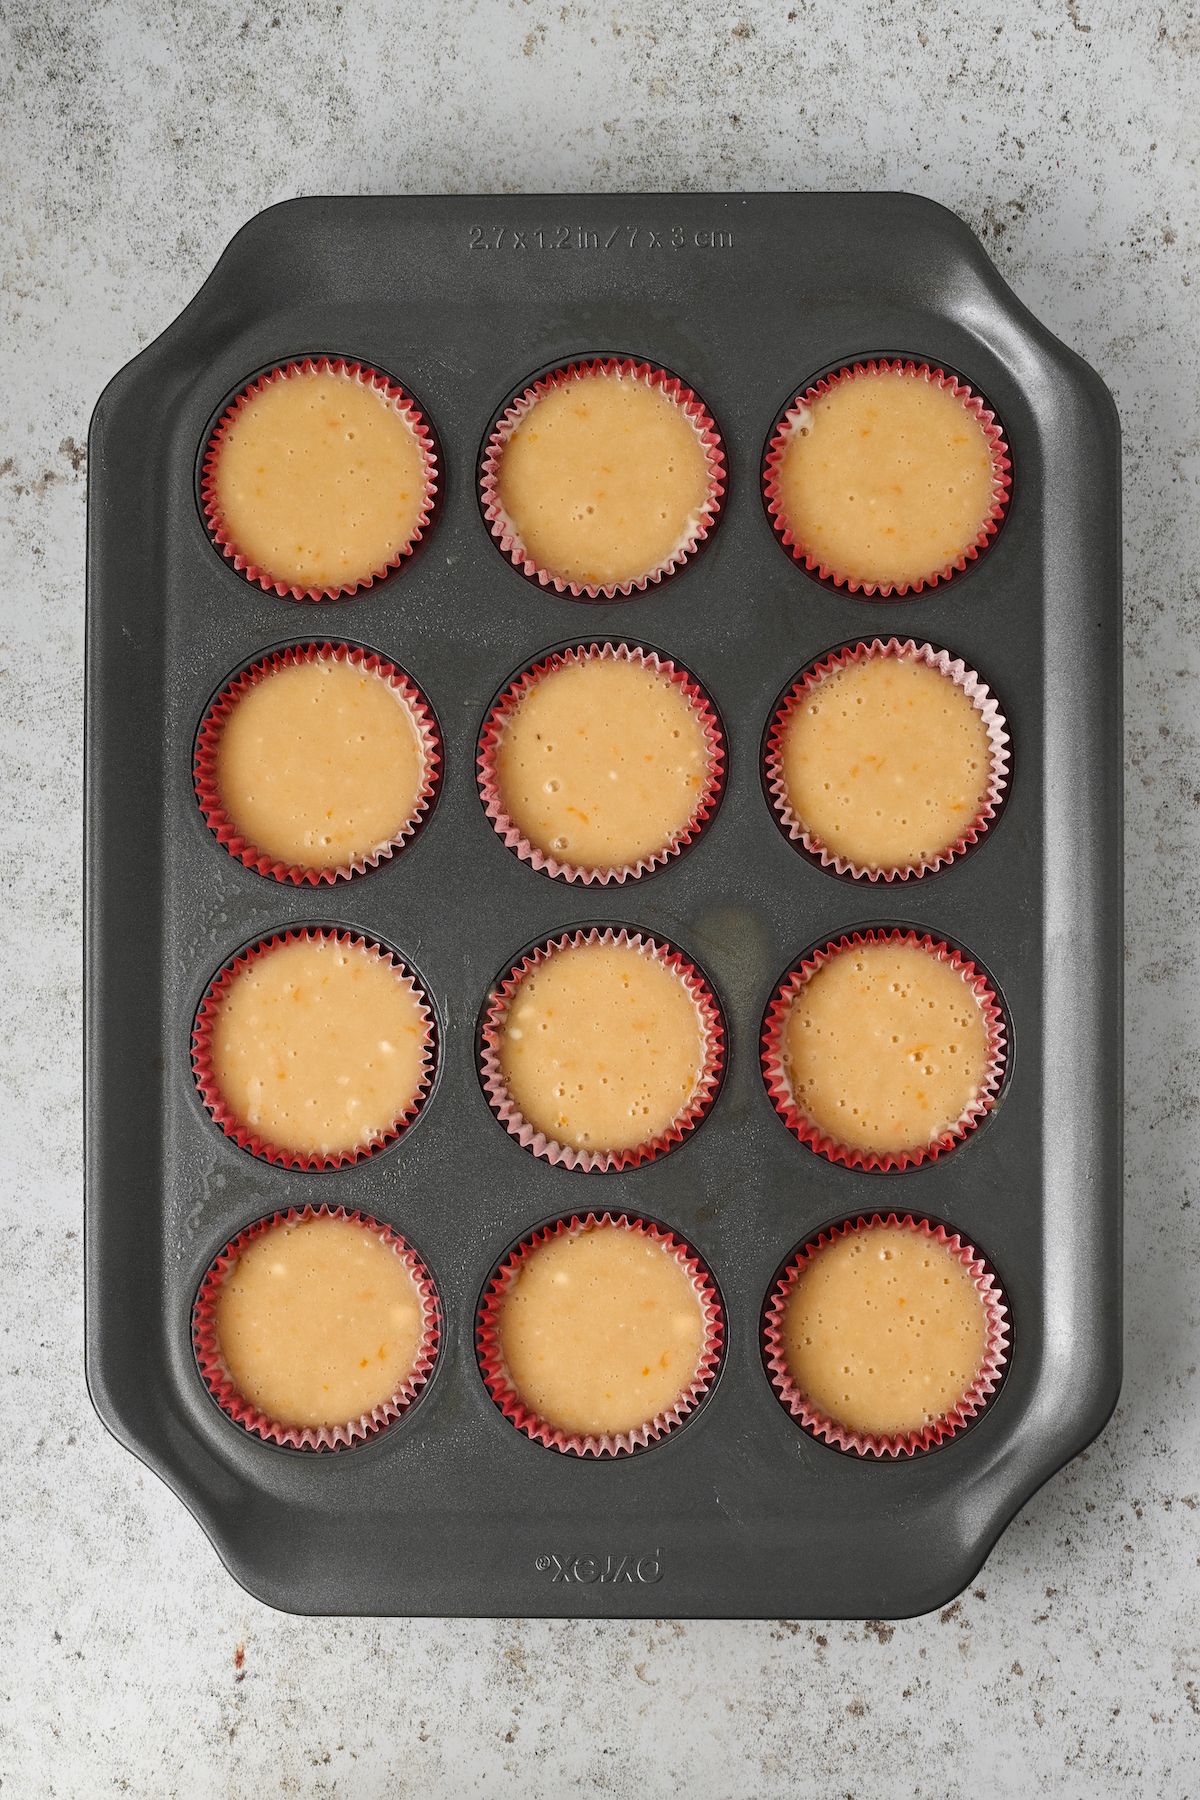 Muffin liners filled with batter.